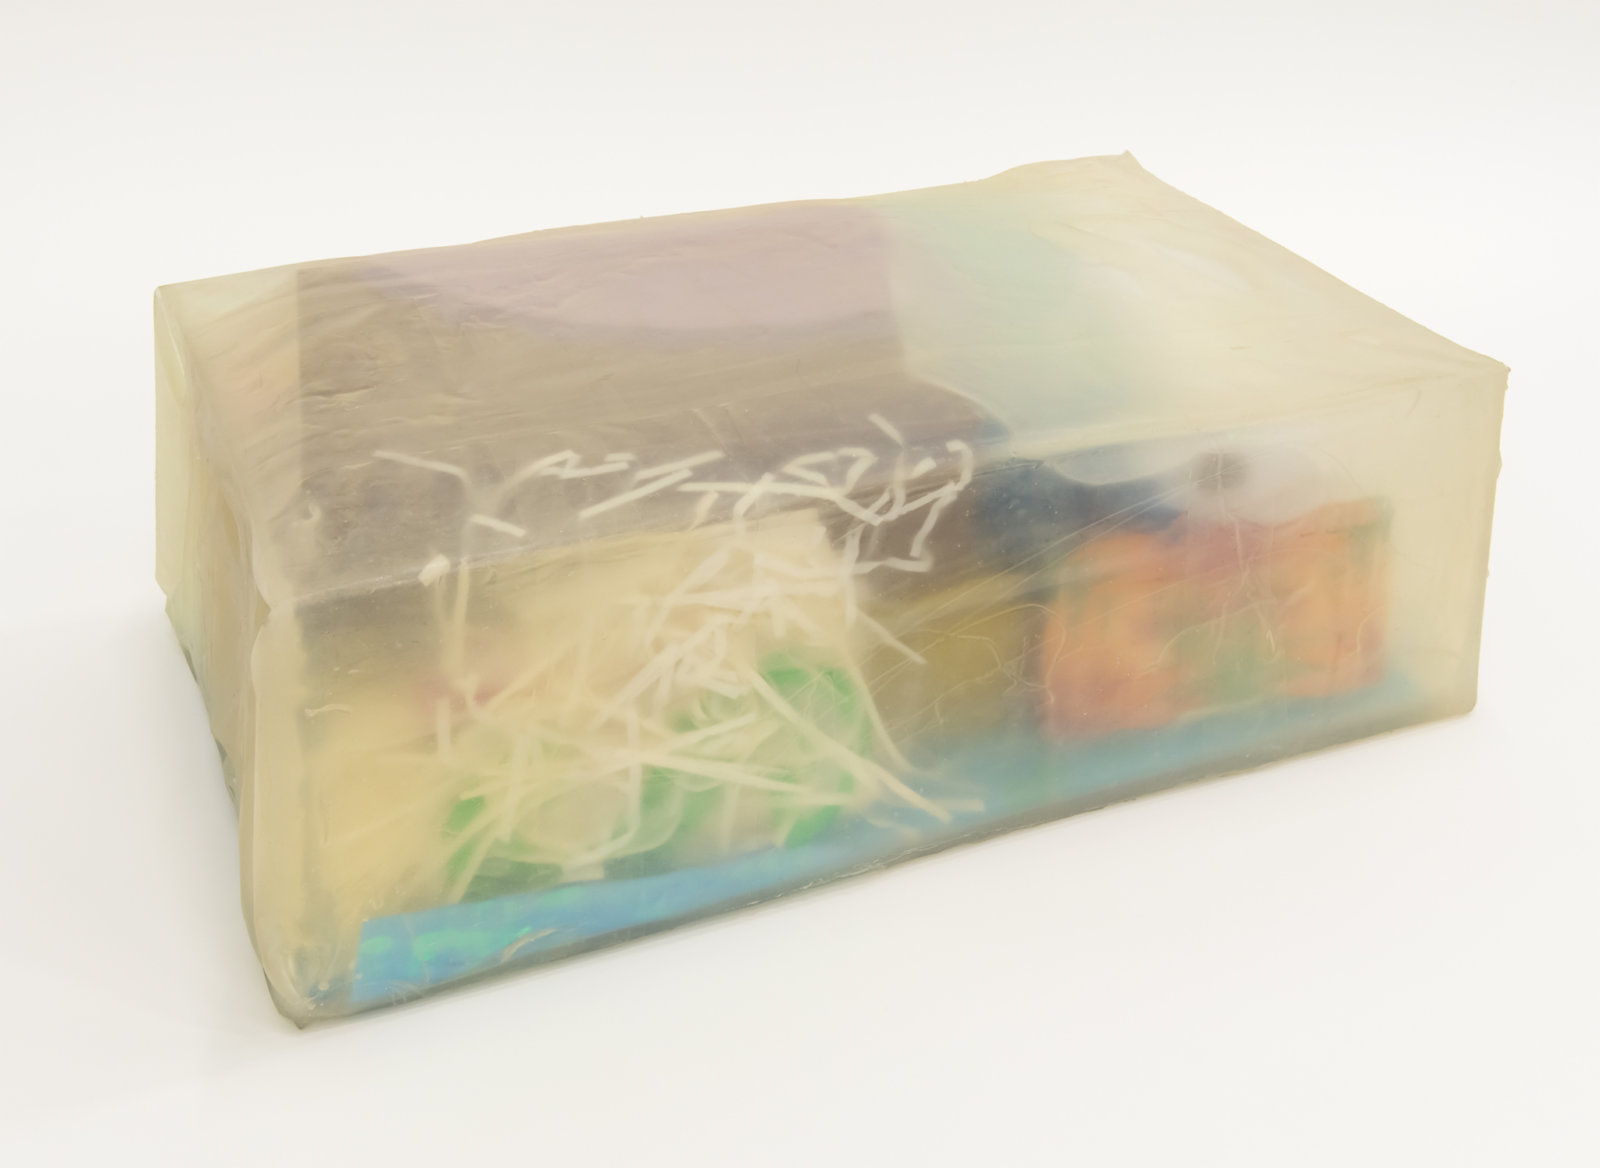 Liz Magor, All the Names (Season’s Greetings), 2016, silicone rubber, paper, plastic, 9 x 25 x 15 in. (24 x 62 x 38 cm)